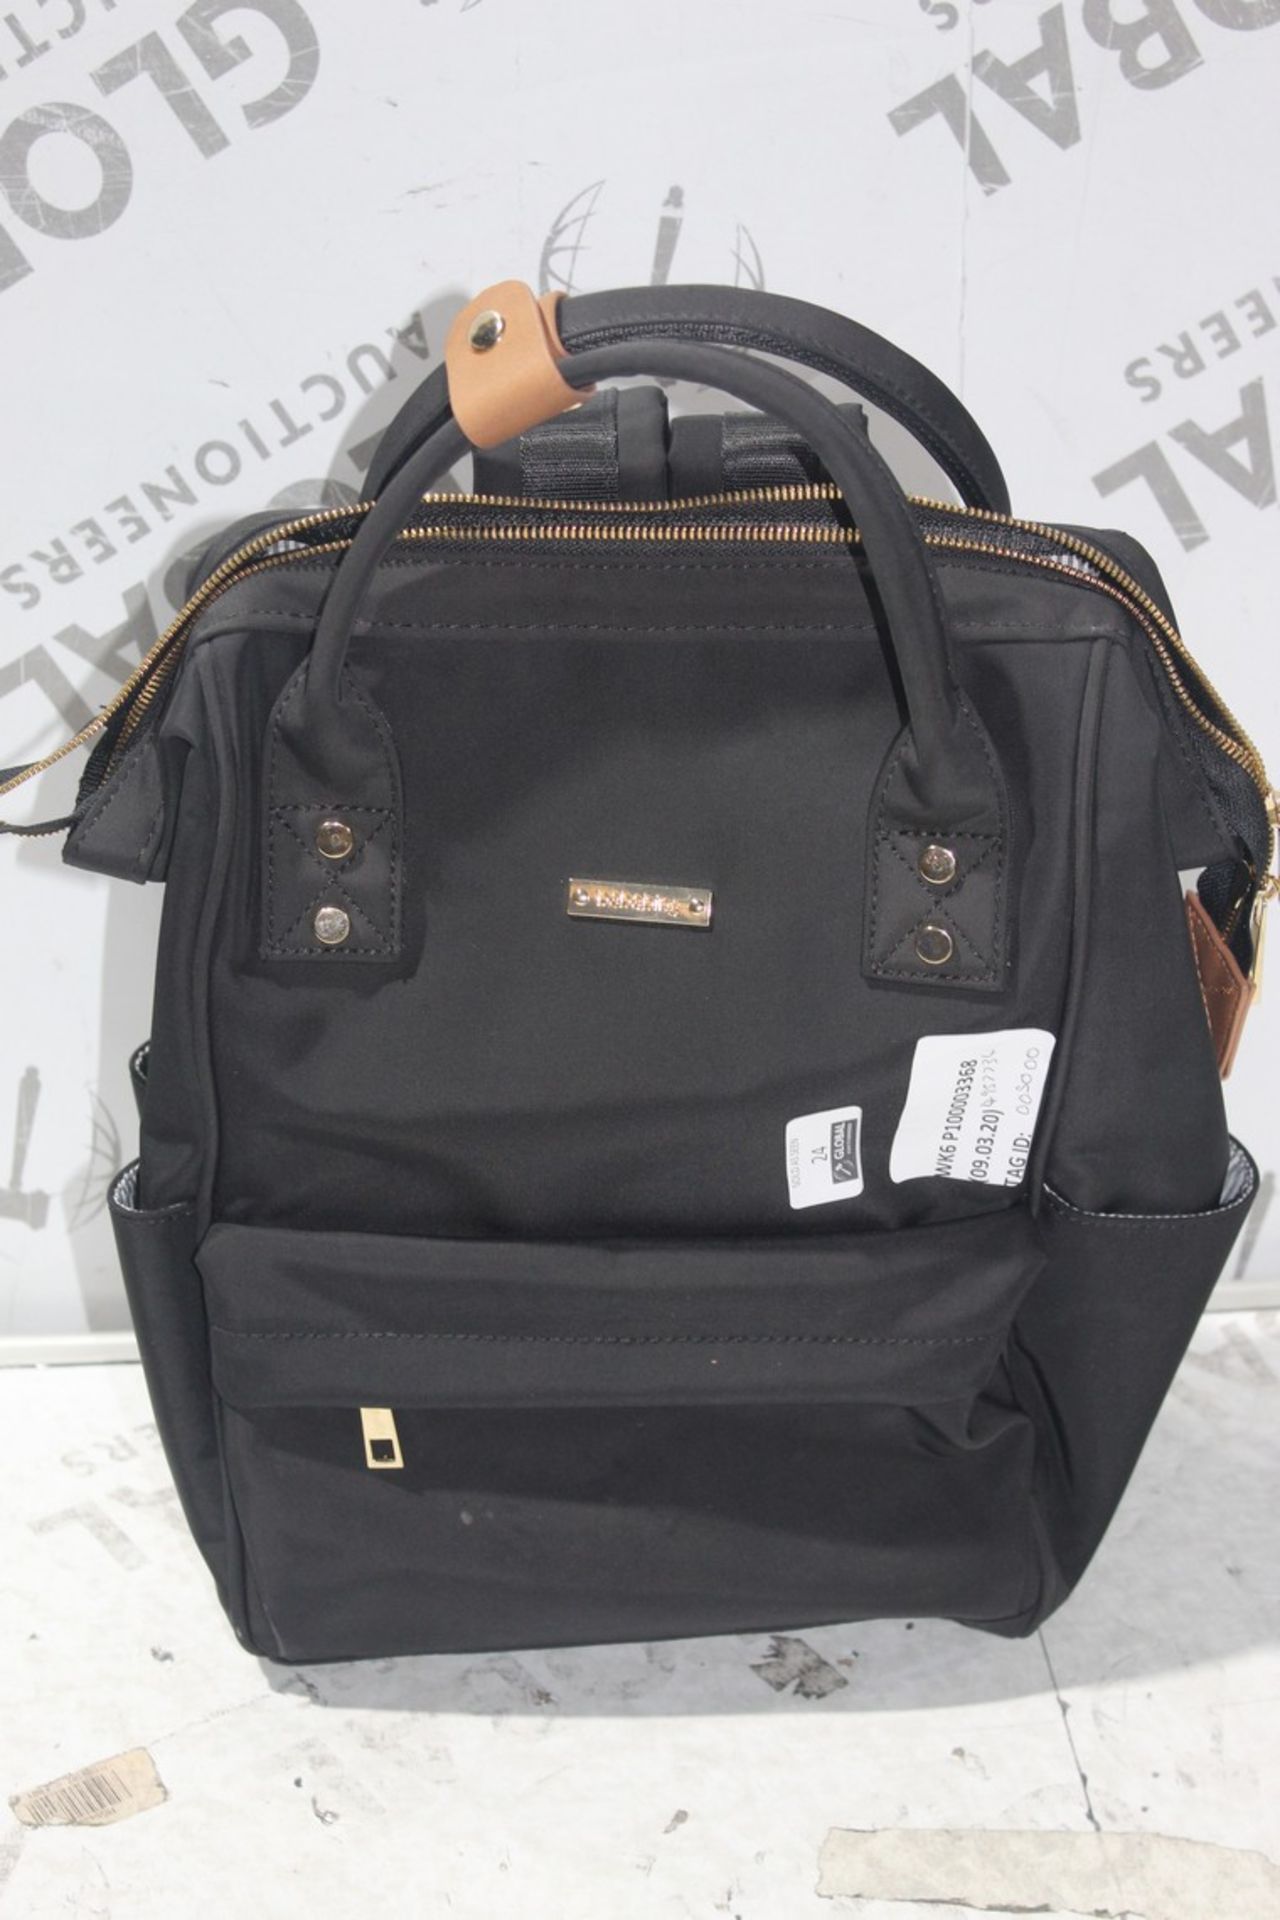 Bababing Black Childrens Changing Bag RRP £50 (4957734) (Public Viewings And Appraisals Are